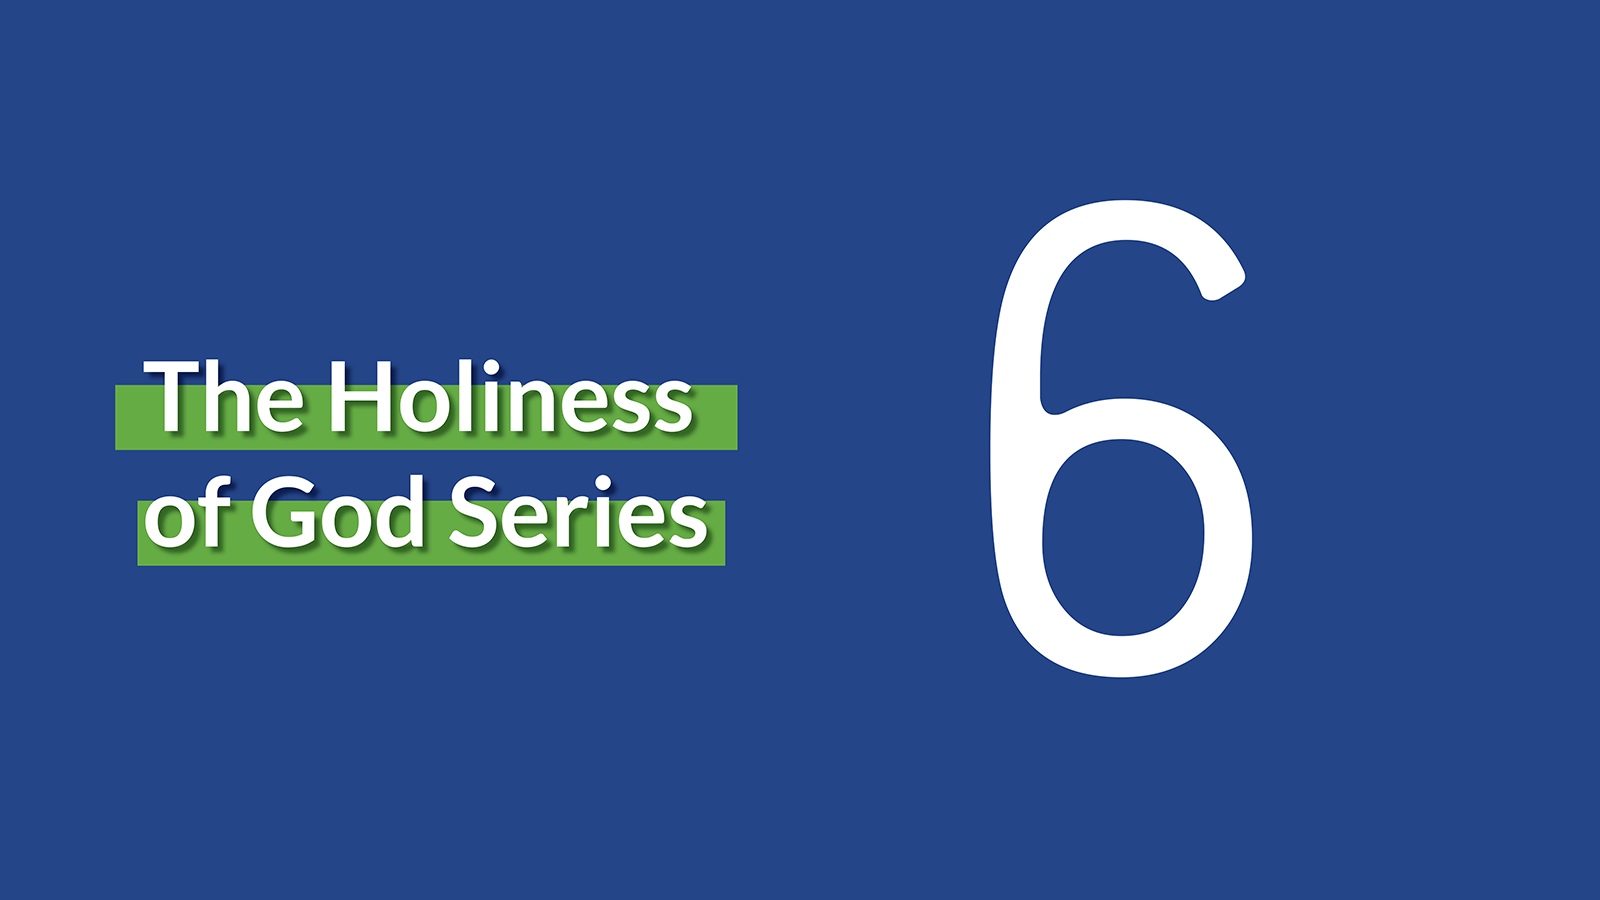 Lesson 6: The Holiness of Christ